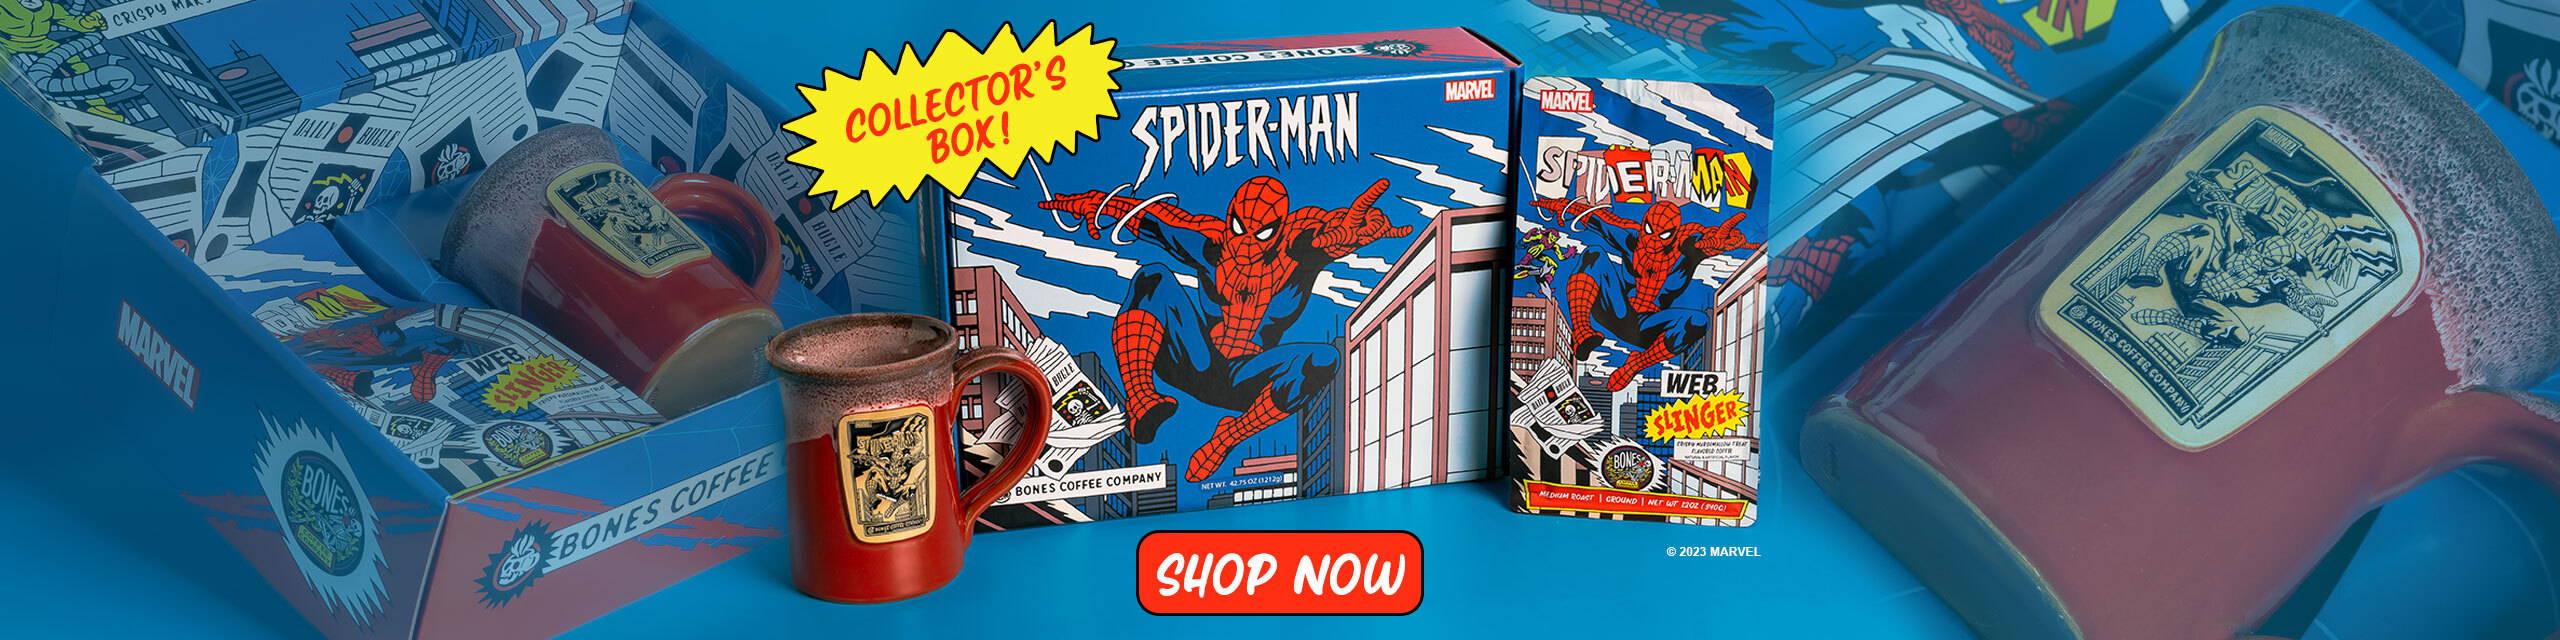 The collector's box for coffee inspired by Marvel Spiderman is in the center, a red mug with a white glaze and the art for Web Slinger is on the left, and a 12 ounce bag of coffee is on the right. The coffee is crispy marshmallow treat flavored and has art of Spiderman on it.